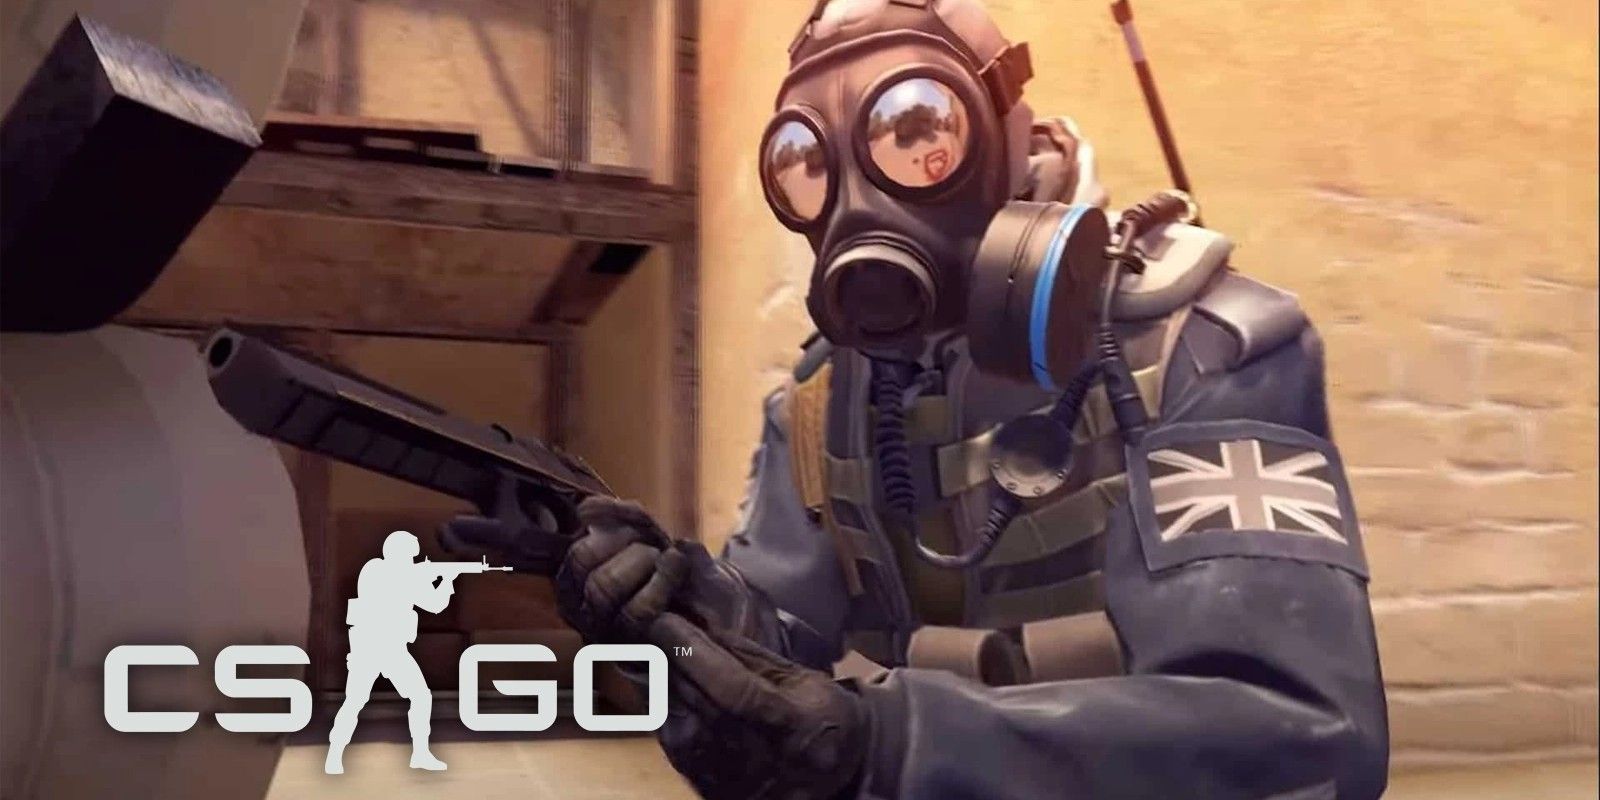 A player dons a gas mask in CS:GO Competitive